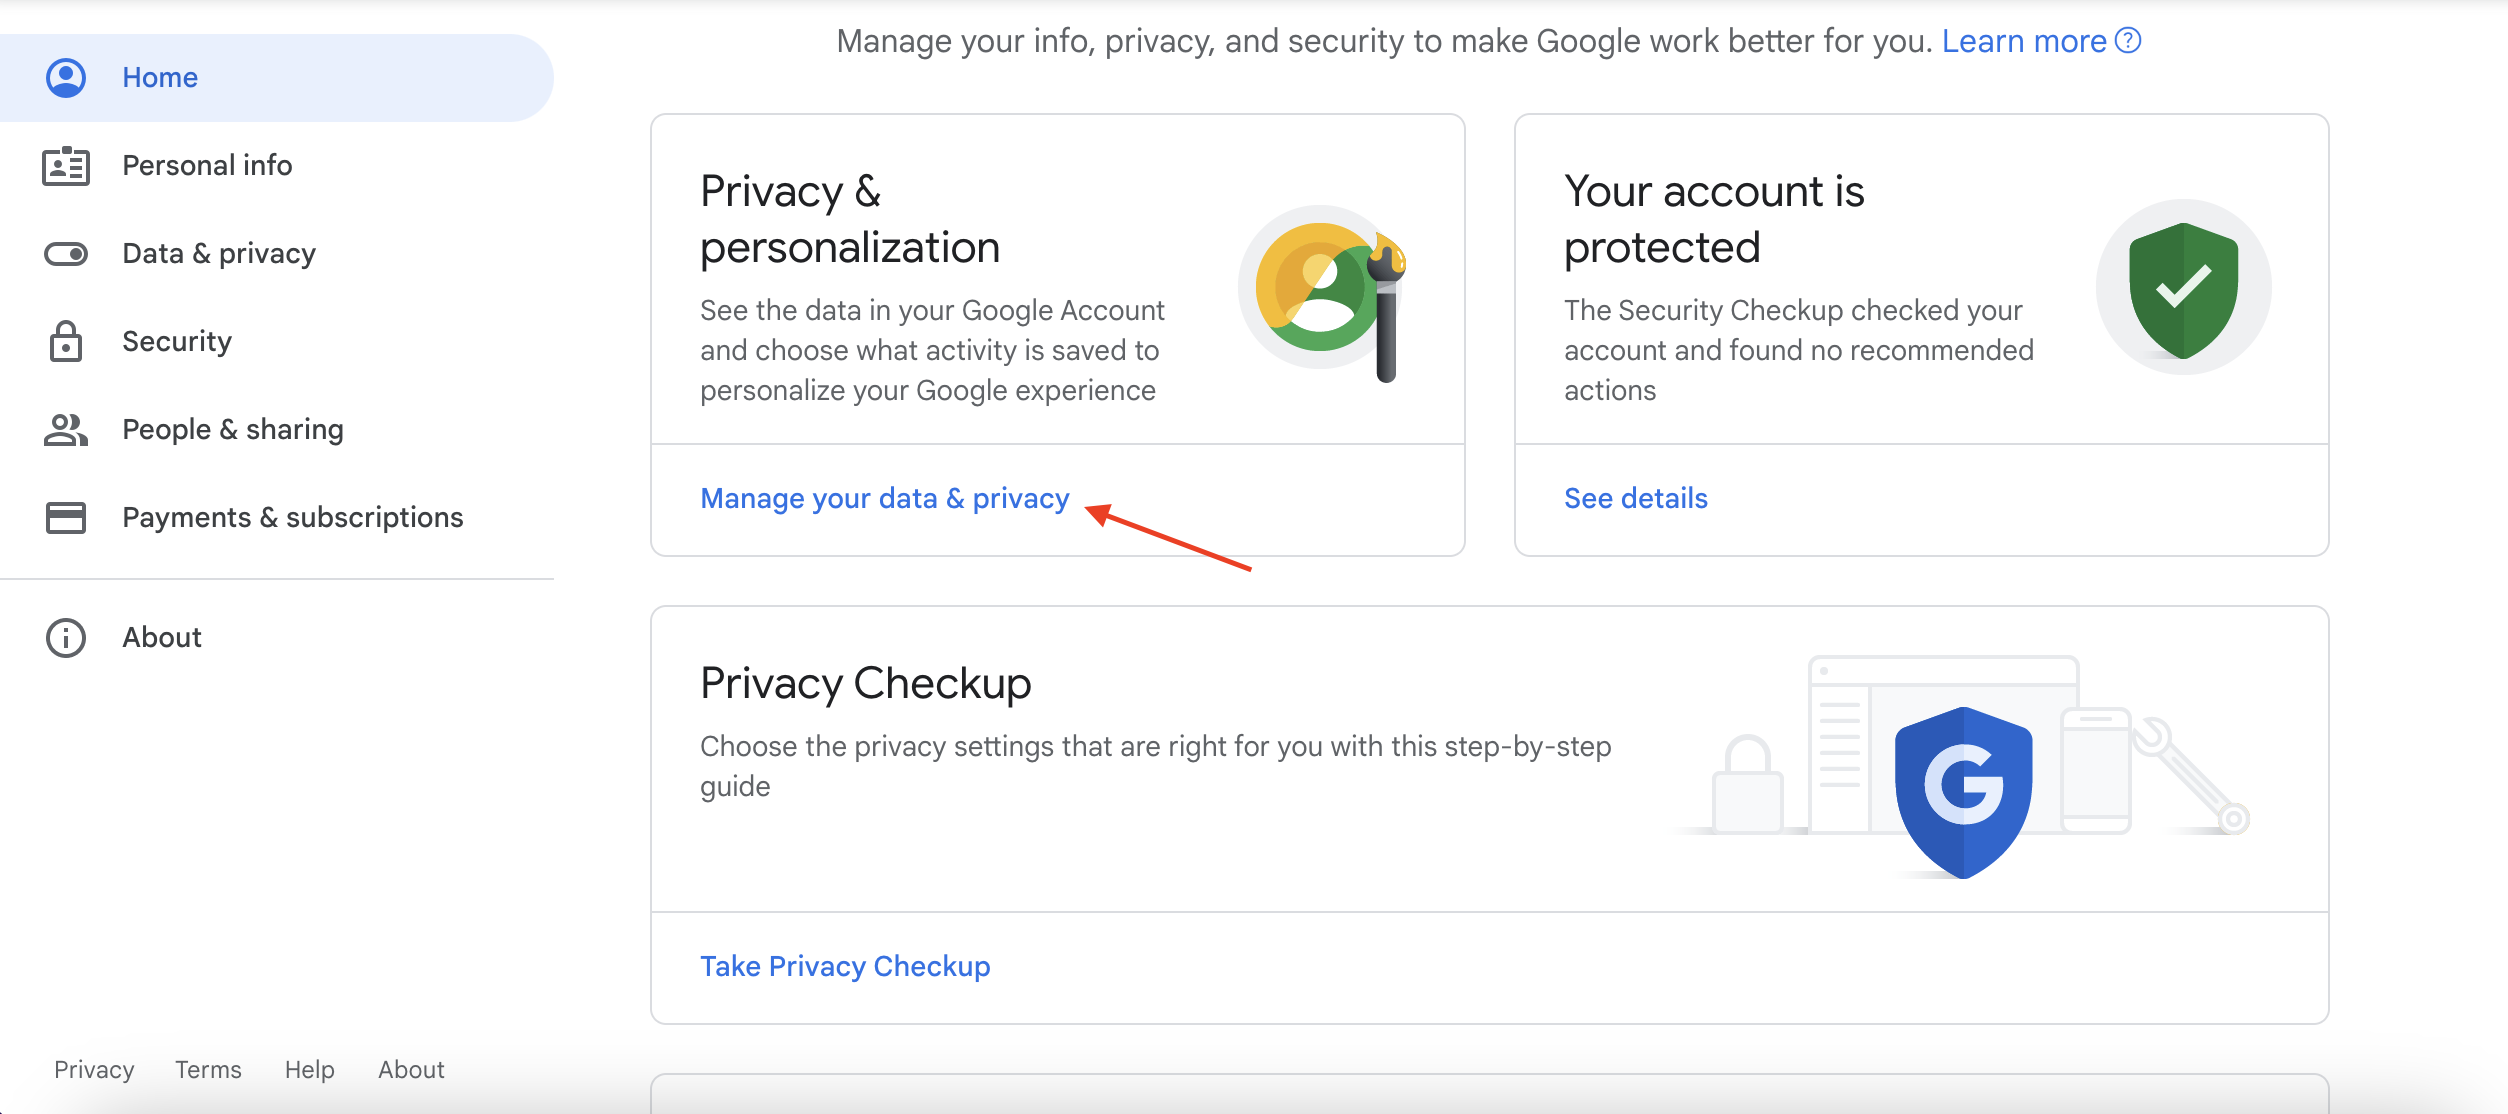 How to turn off ad personalization: Go to Manage your dara & privacy in Google account